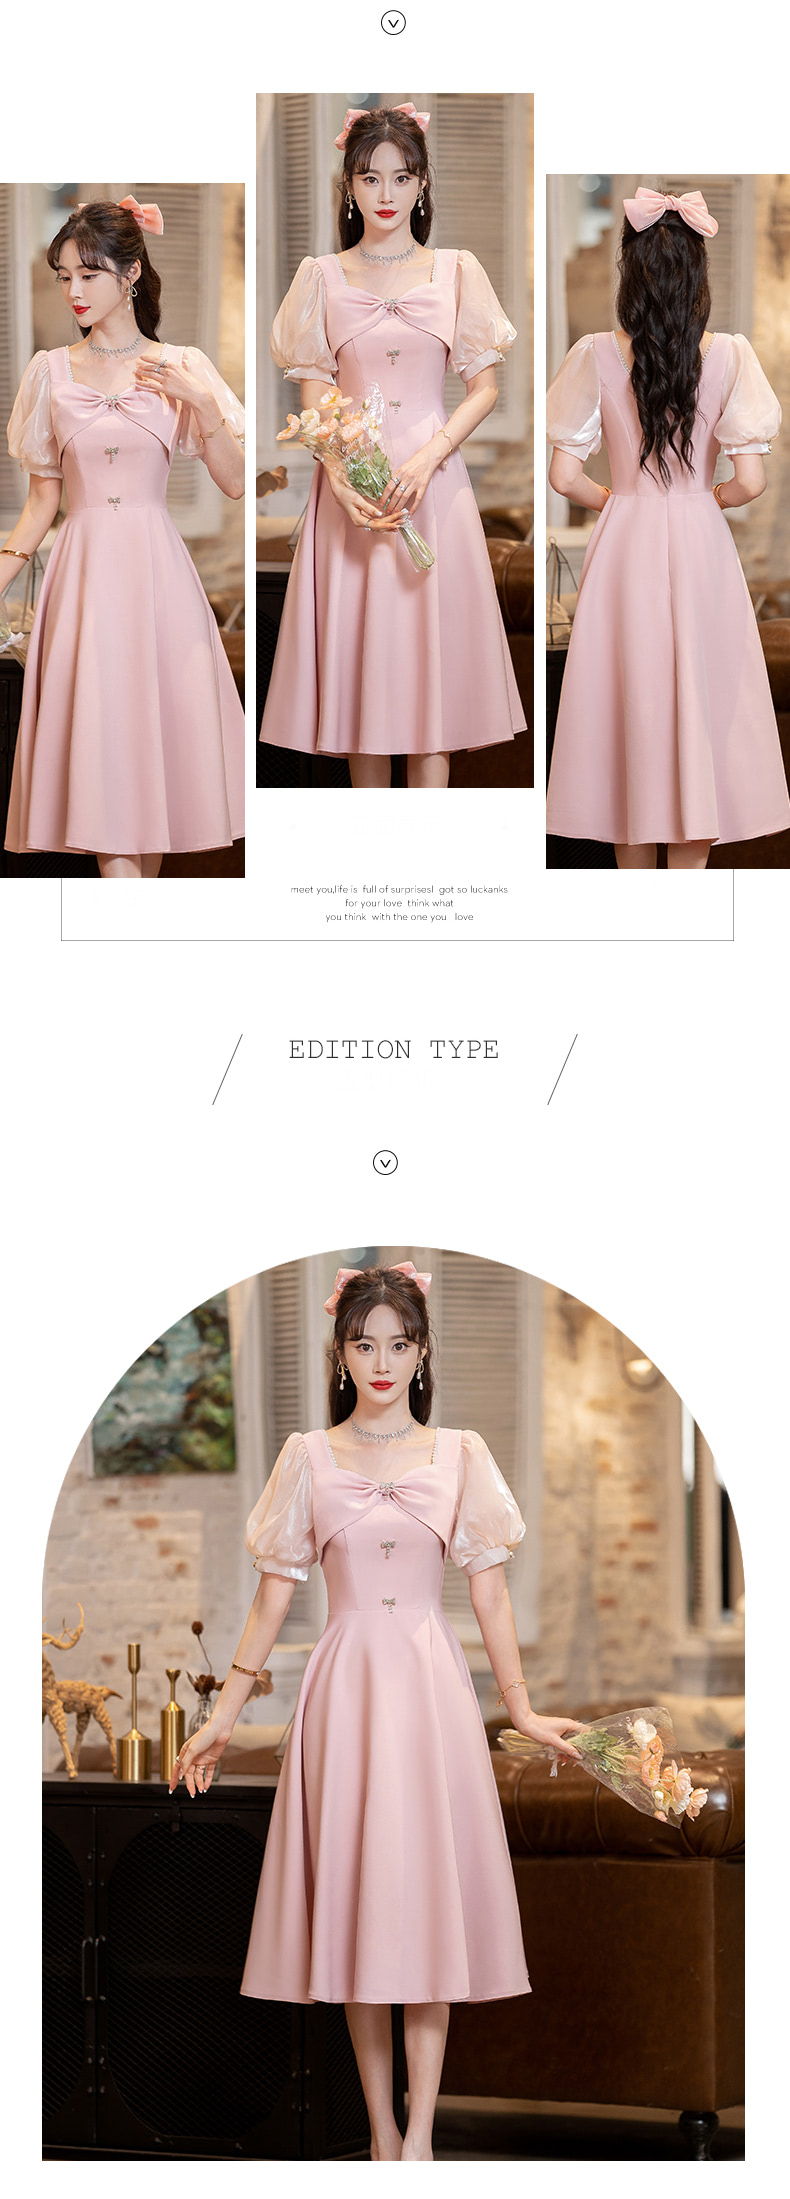 Modest-Pink-Simple-Evening-Prom-Midi-Dress-for-Party-Homecoming08.jpg